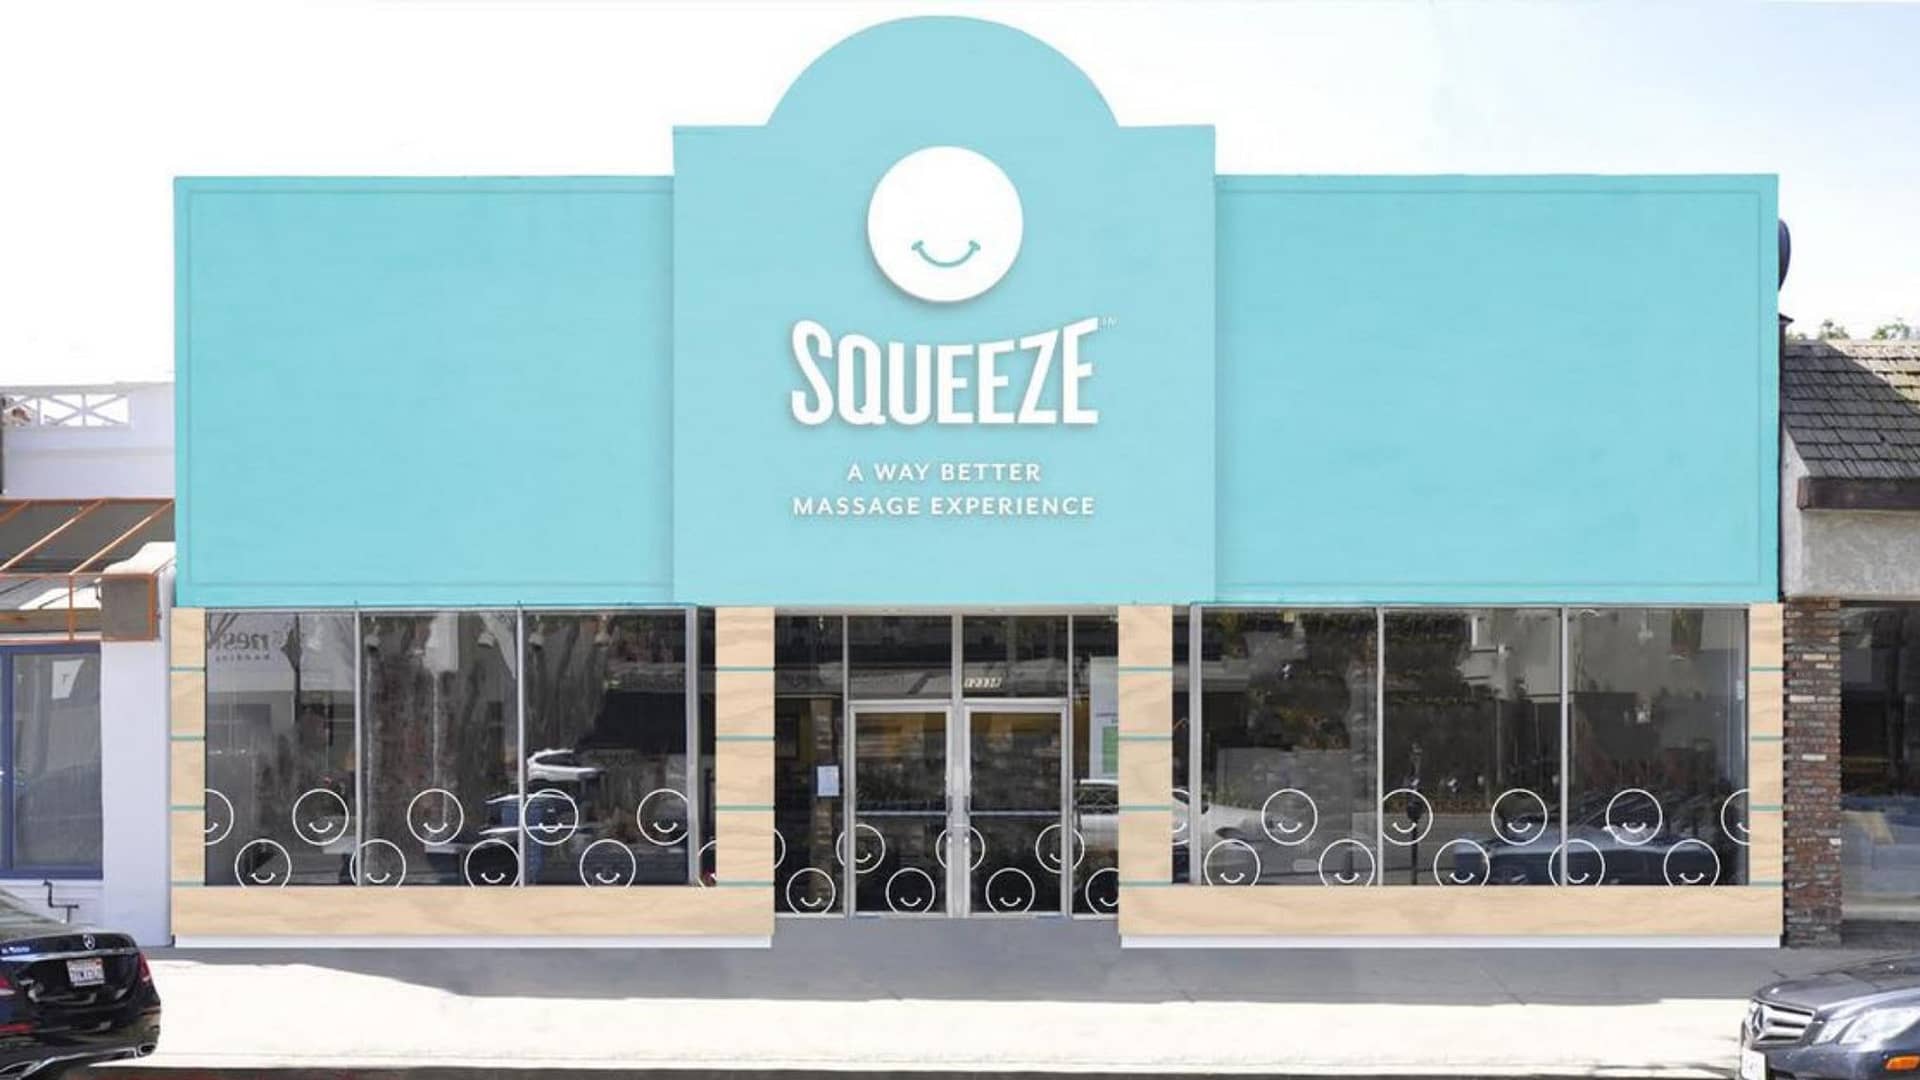 Squeeze Massage Franchise Plans 490% Expansion Growth Empowered by Occupier